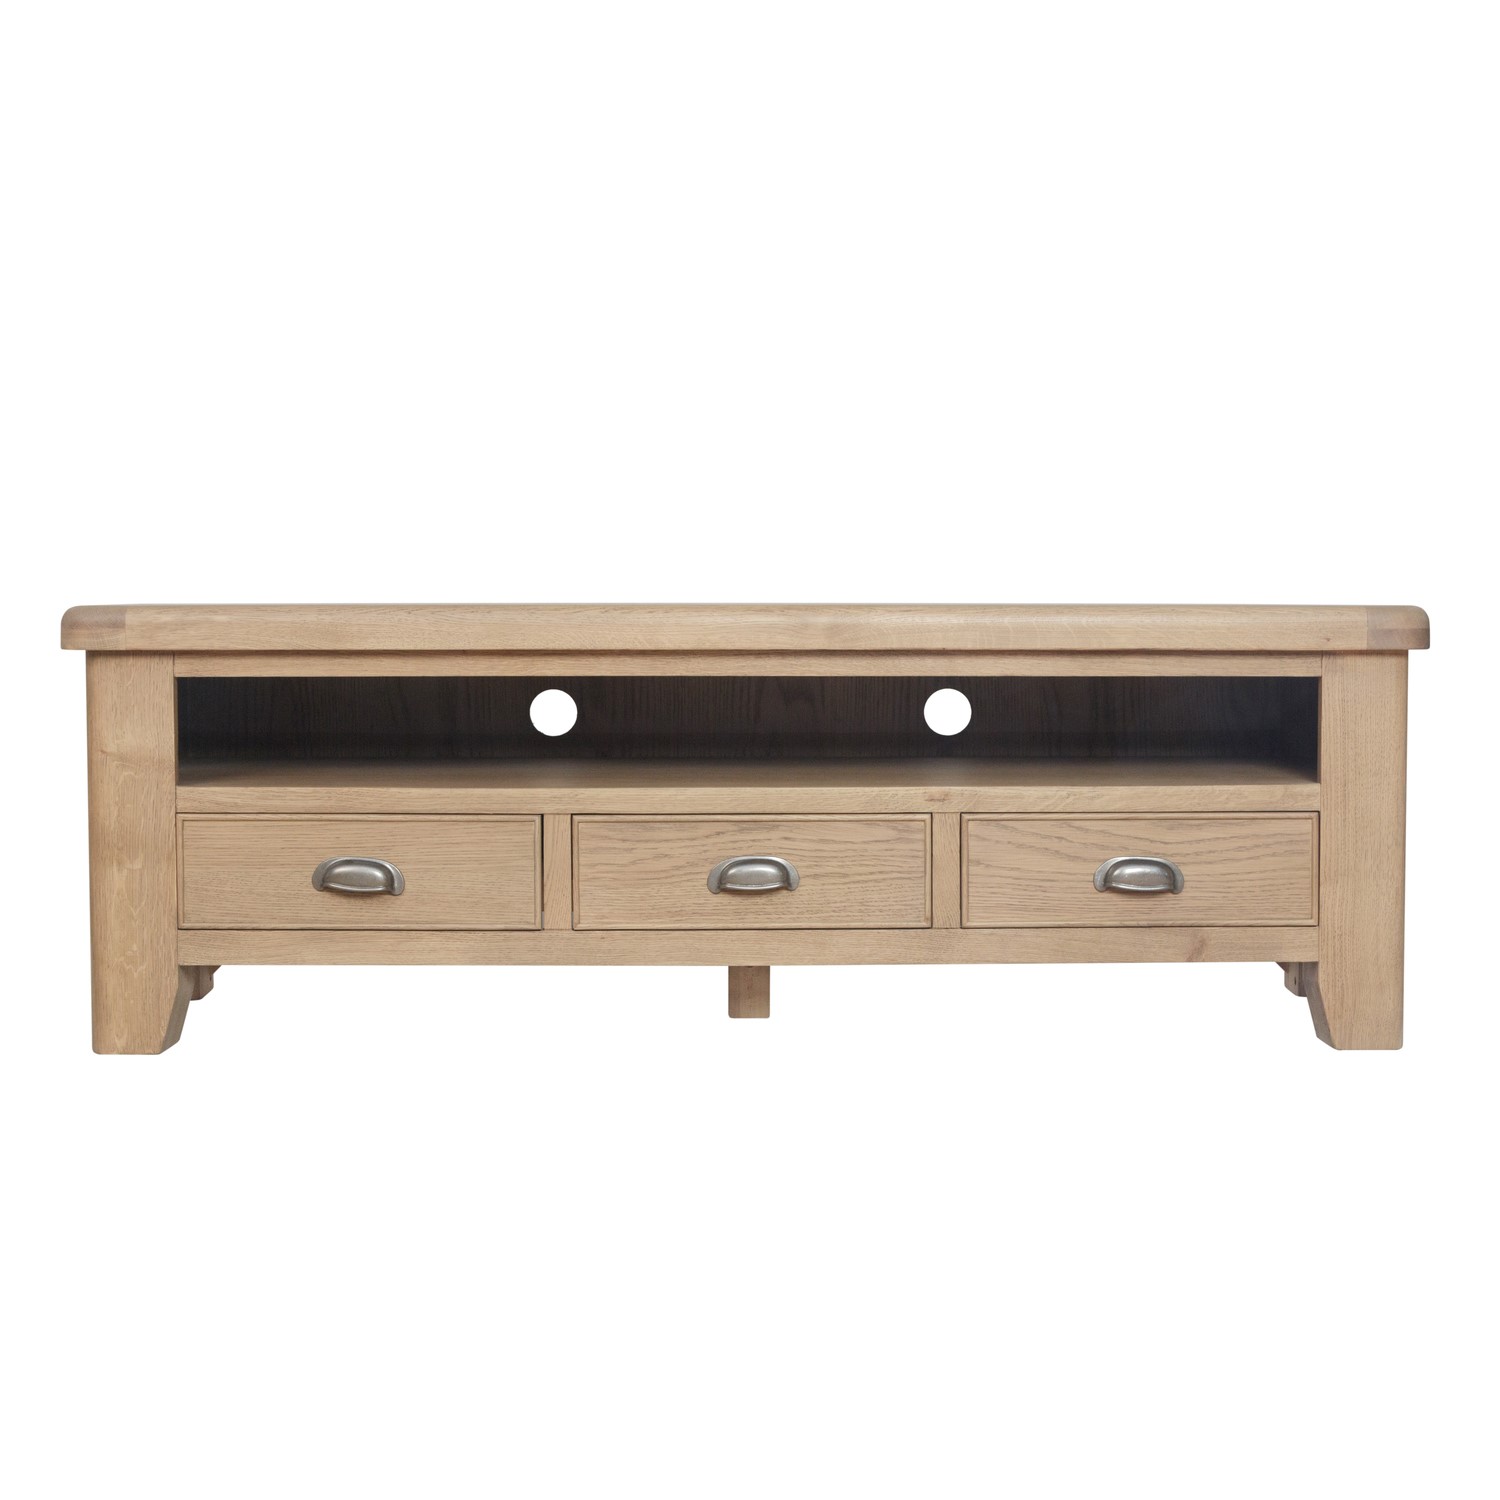 Photo of Large smoked oak tv stand with storage